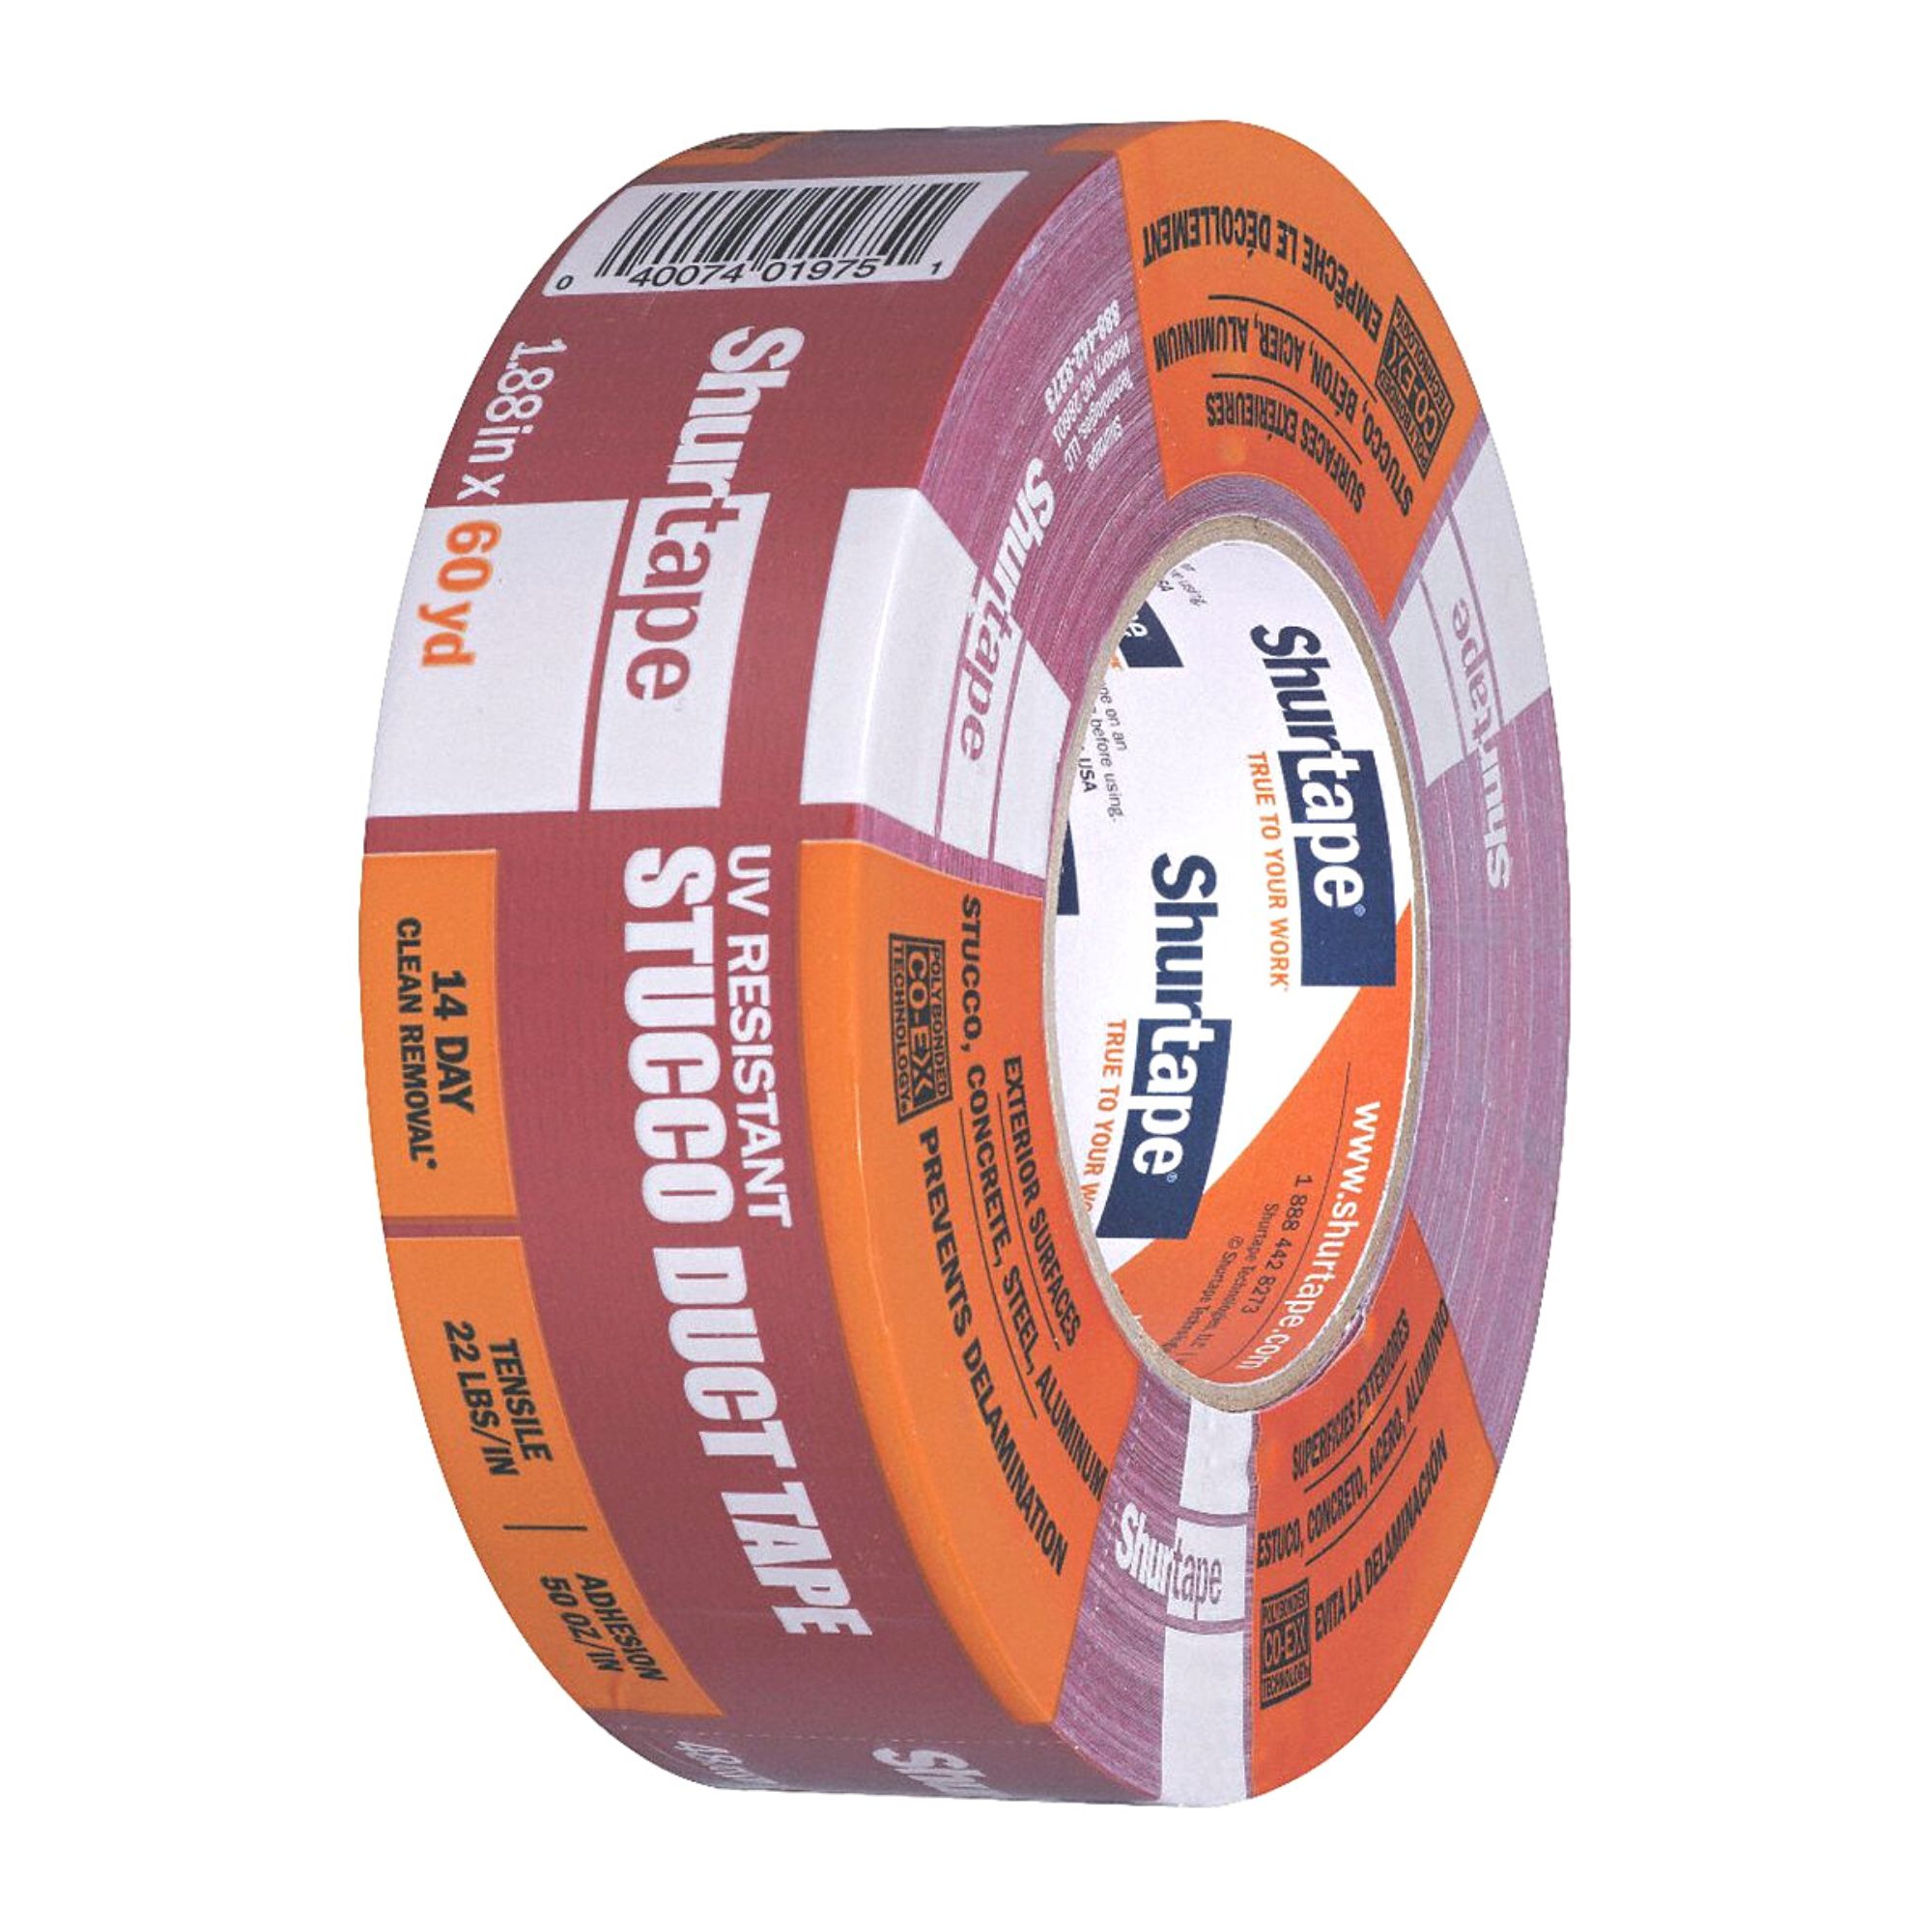 Shurtape PC-667 Specialty Grade Stucco Masking Duct Tape [UV-resistant]